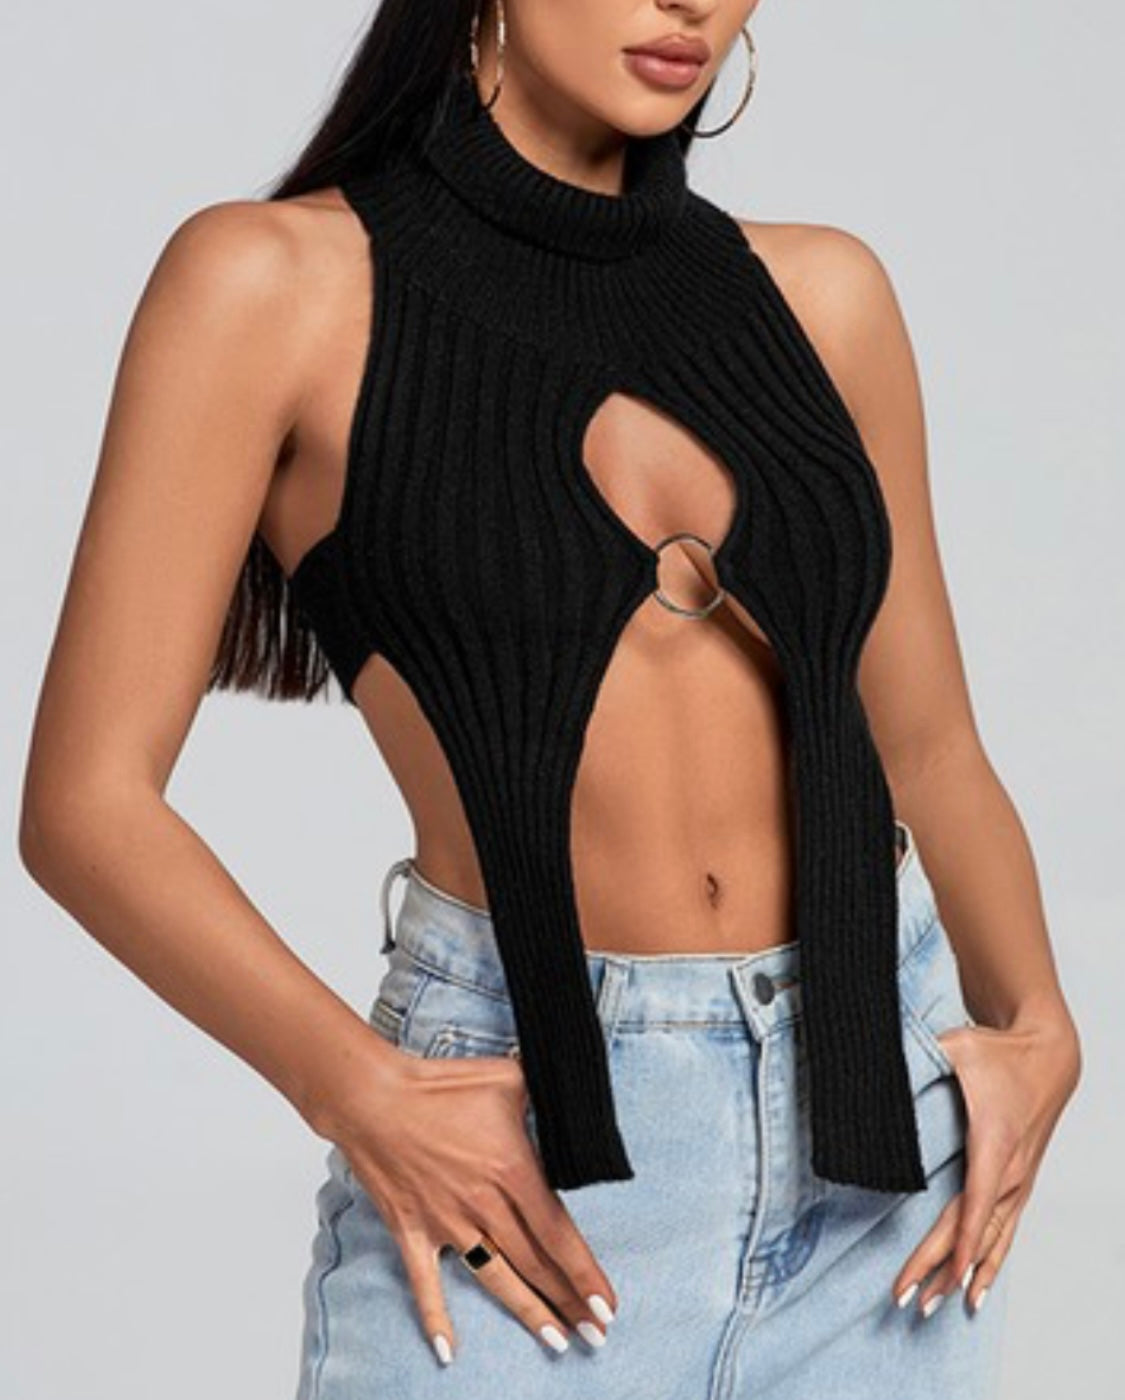 Sexy knit top